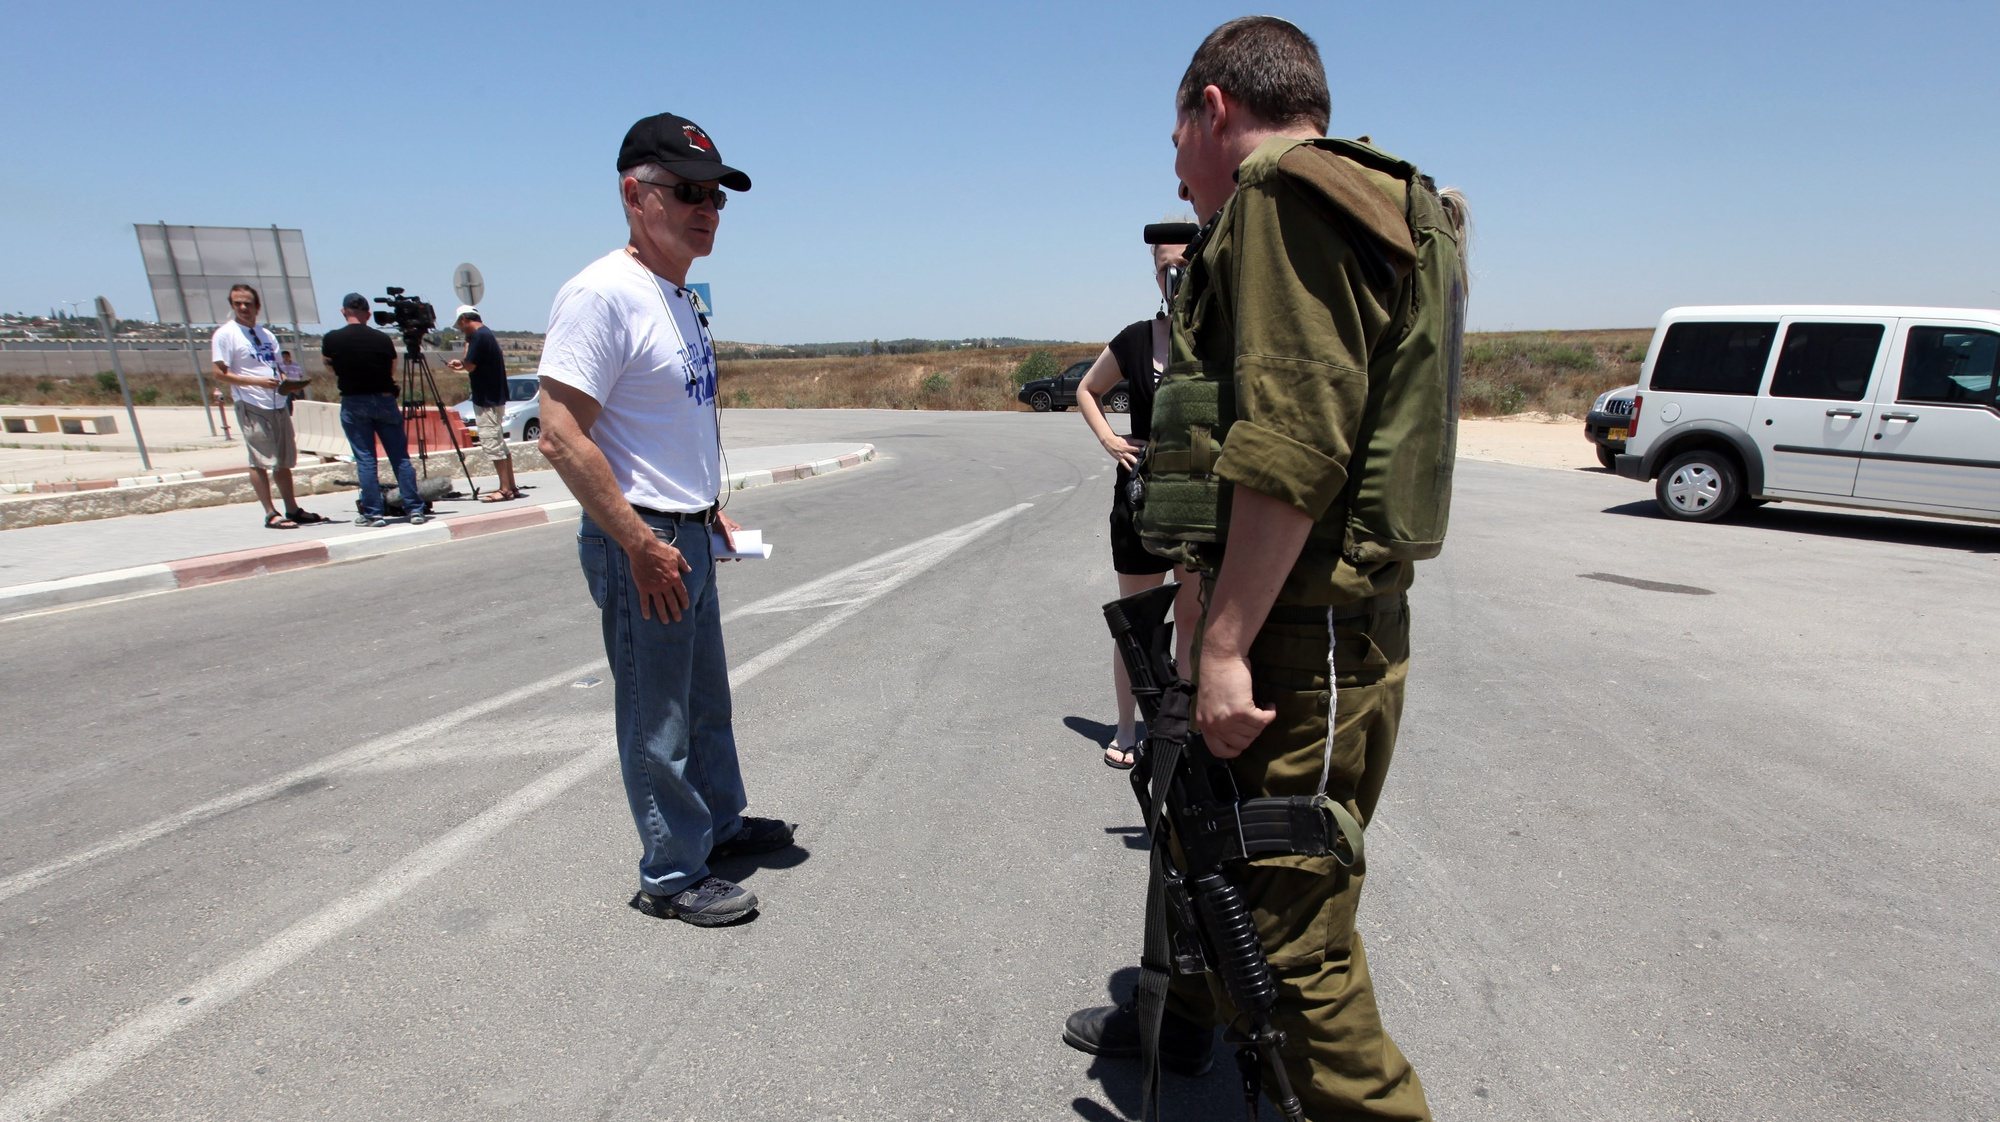 epa01770888 Noam Shalit, the father of abducted Israeli soldier Gilad Shalit, speaks with an Israeli soldier during duty at the Erez Checkpoint  crossing between southern Israel and the northern Gaza Strip on 23 June 2009, after some 50 Israeli activists dispersed after blocking access to the crossing terminal for the entire morning.  The activists  were demanding the freedom for Shalit and better humane conditions for his captivity, including visits by the International Red Cross, as they mark three-years since Shalit was taken captive by Hamas militants in a corss border raid on 25 June 2006.  EPA/JIM HOLLANDER ISRAEL OUT